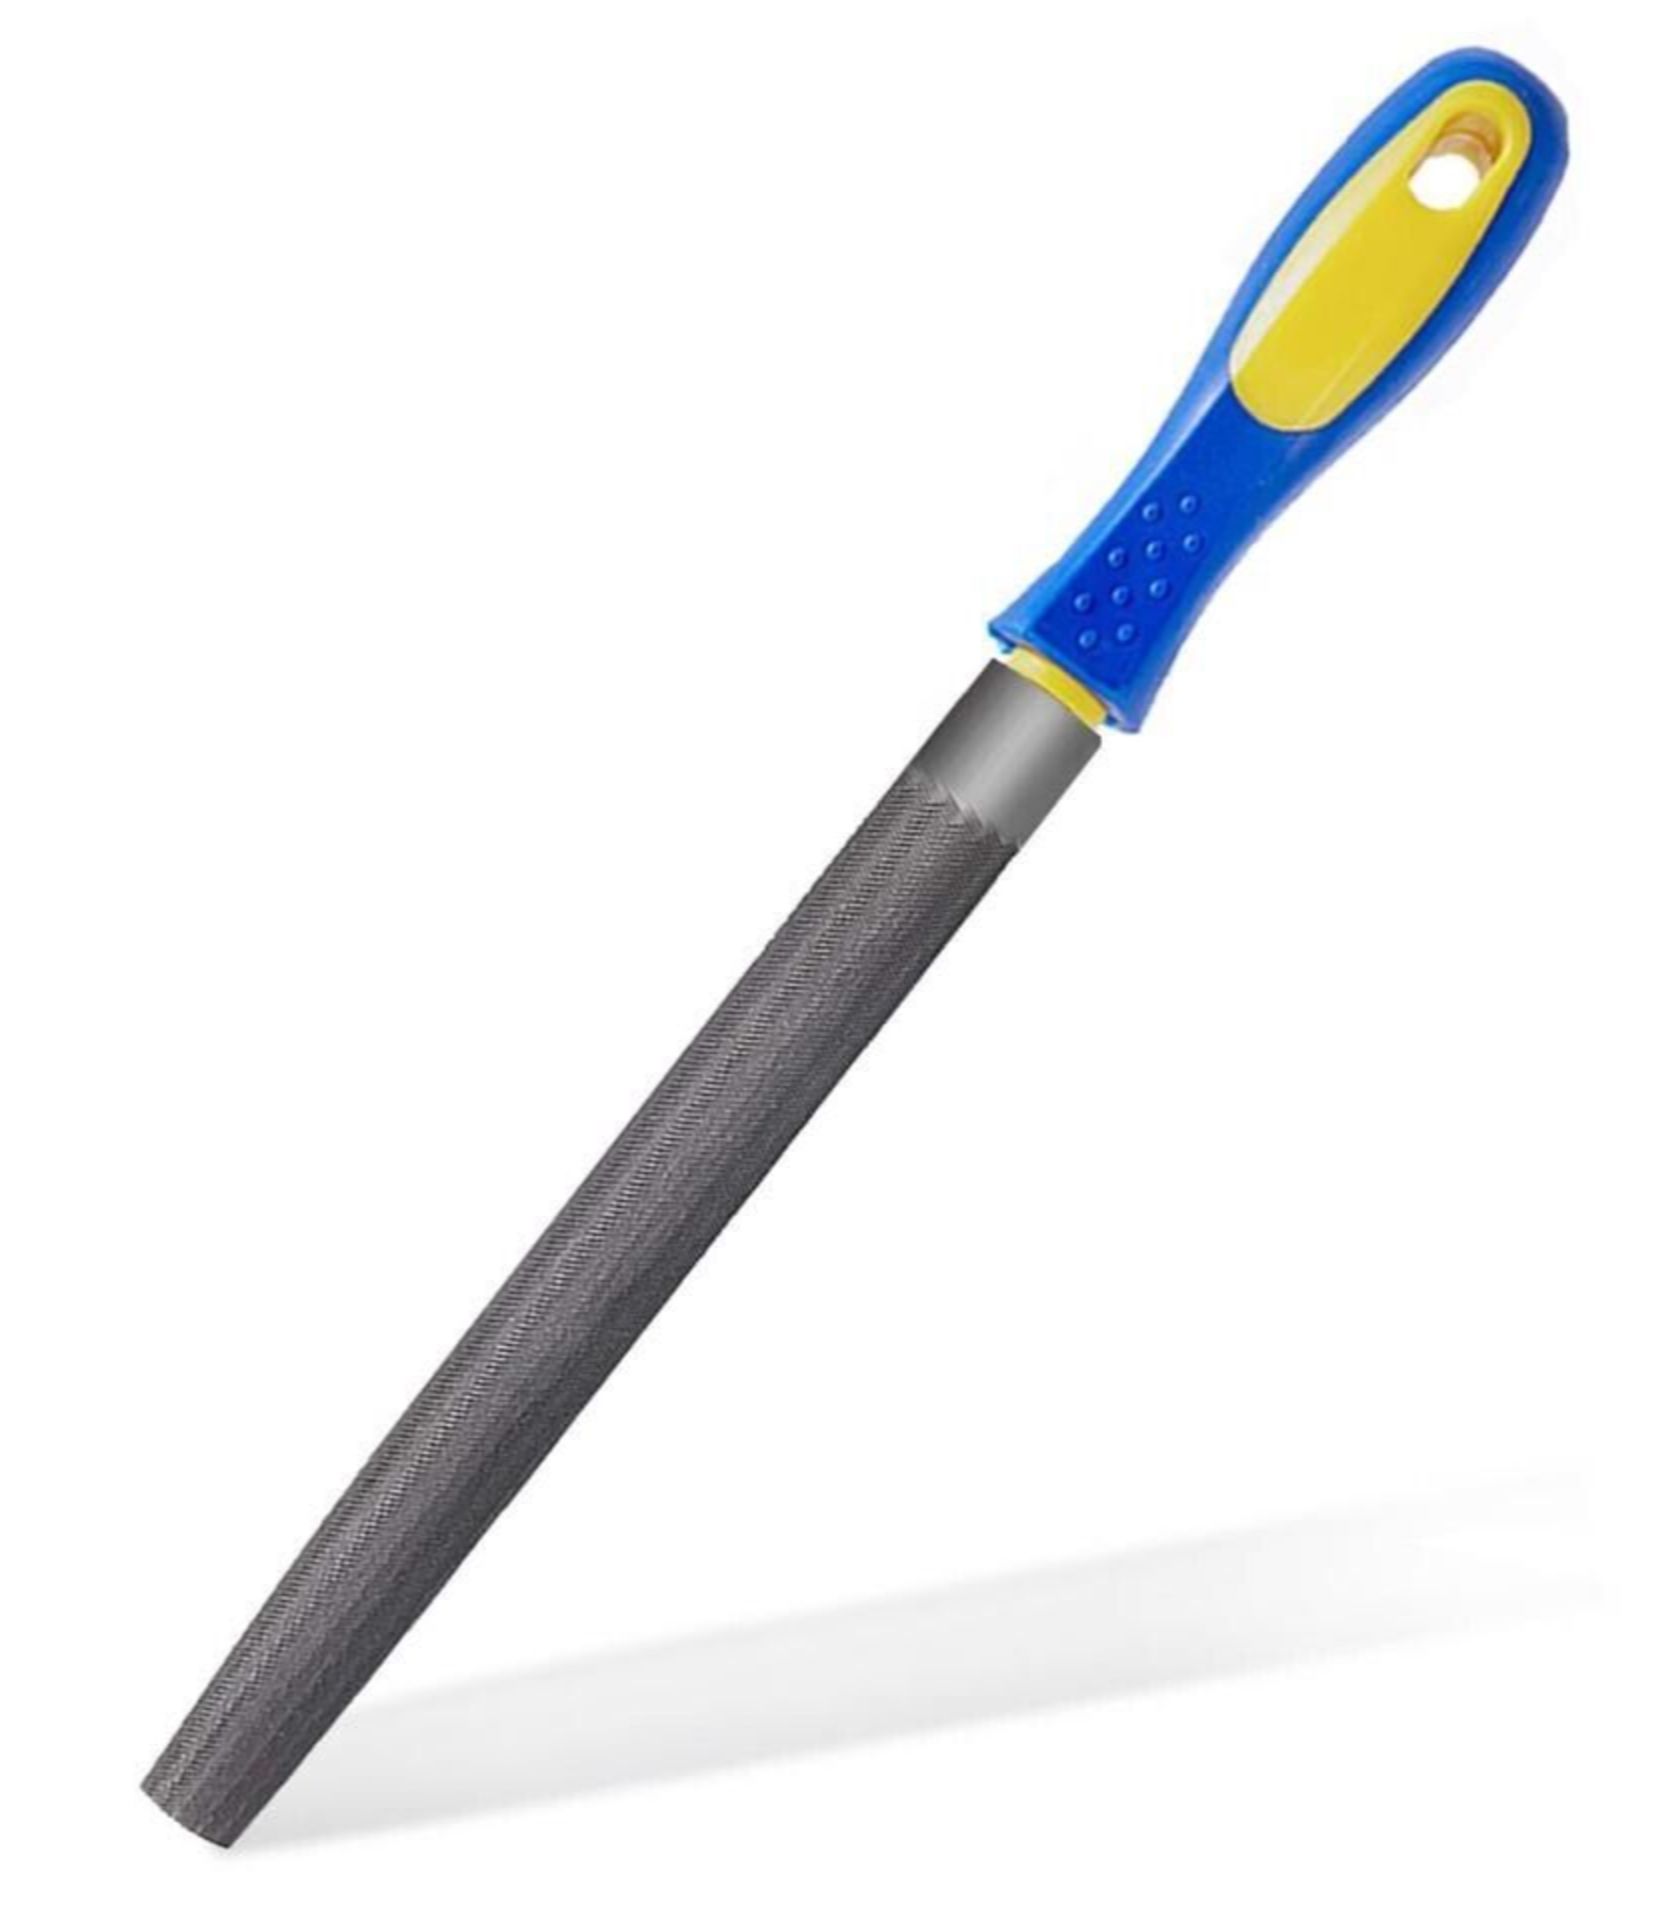 2XKALIM 8 INCH HALF-ROUND HAND FILE WITH HIGH CARBON HARDENED STEEL, ERGONOMIC GRI - Image 3 of 4